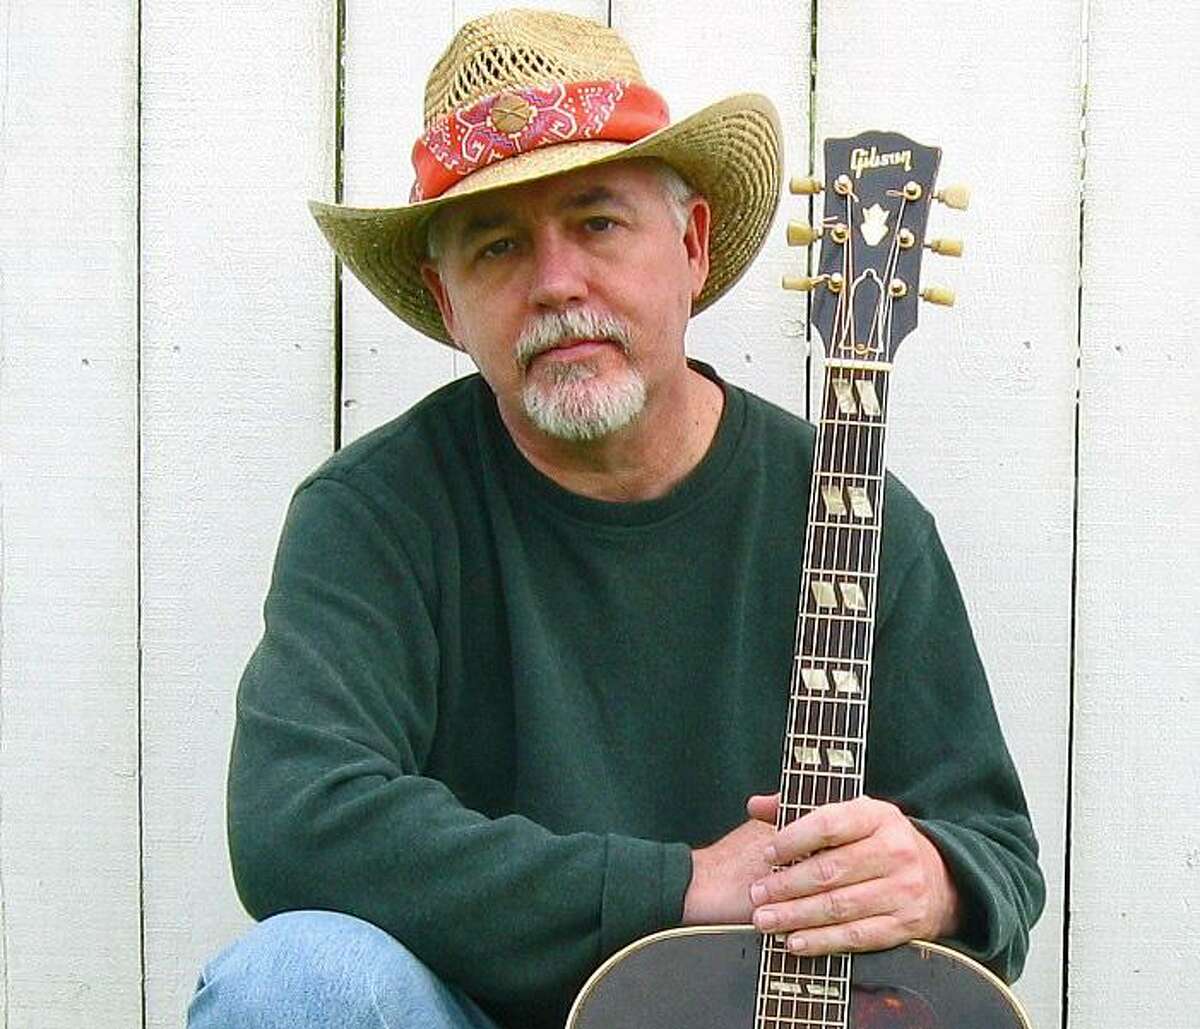 Gracing the stage at Voices Café this weekend are country hit-makers Don Henry and Craig Bickhardt (pictured here) performing at 8 p.m. on Saturday, April 8.